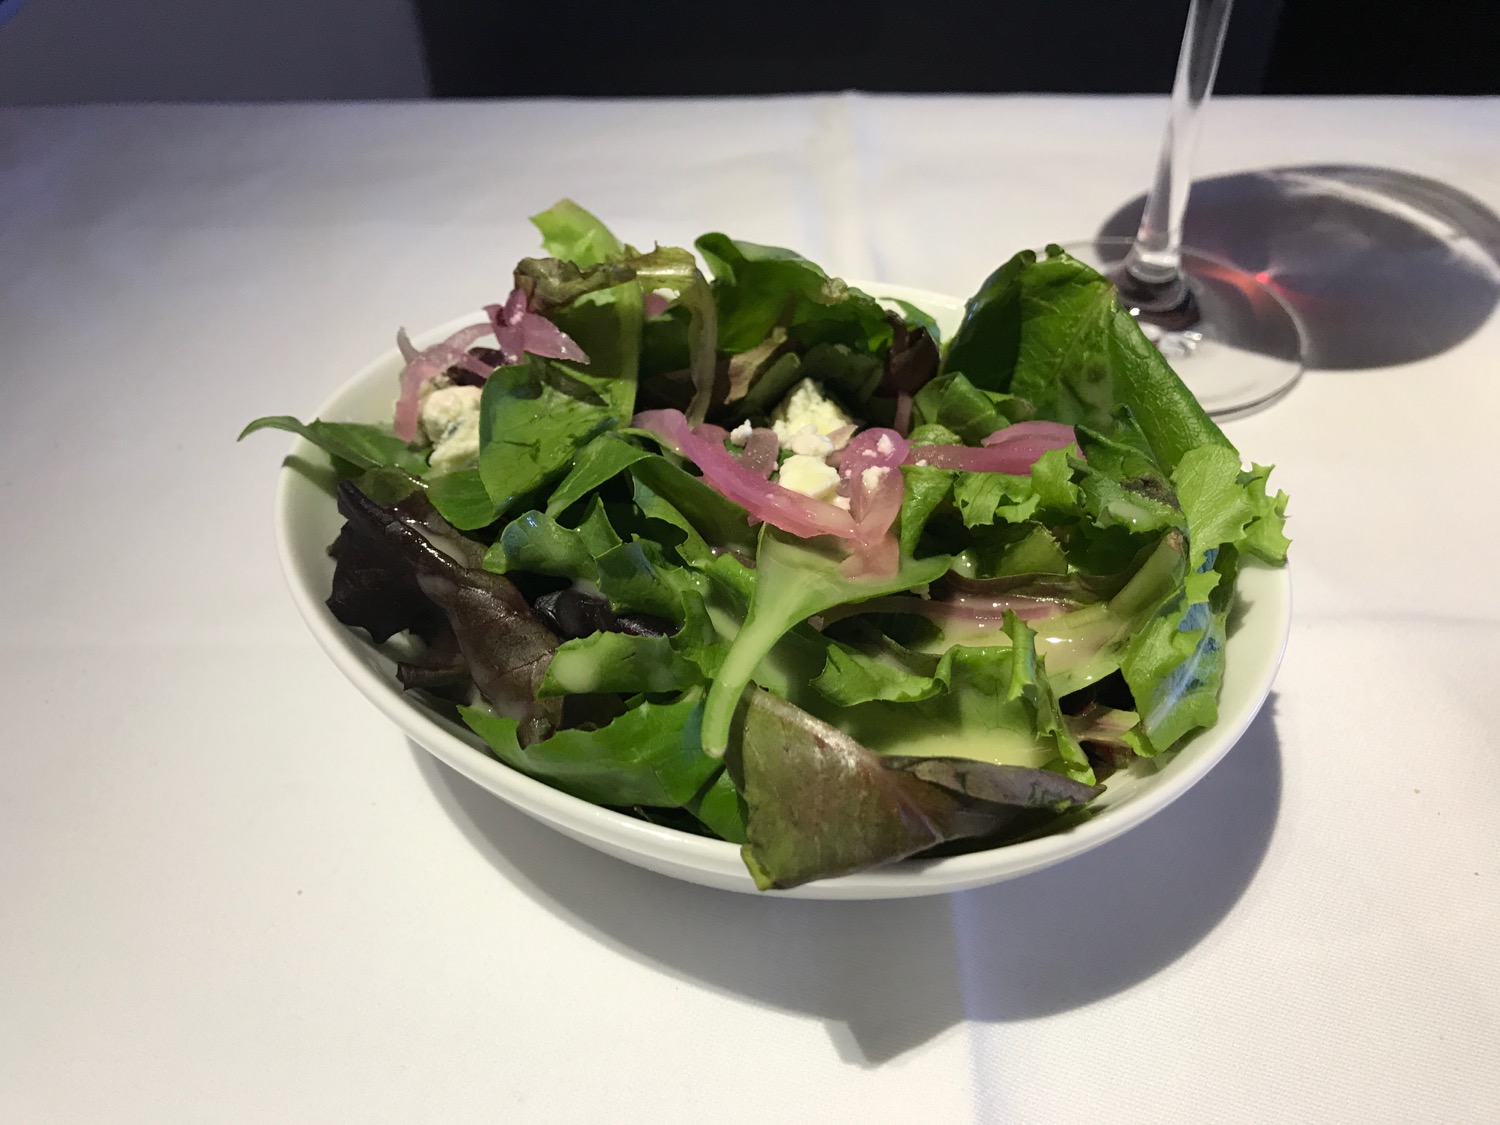 a bowl of salad with a glass of wine